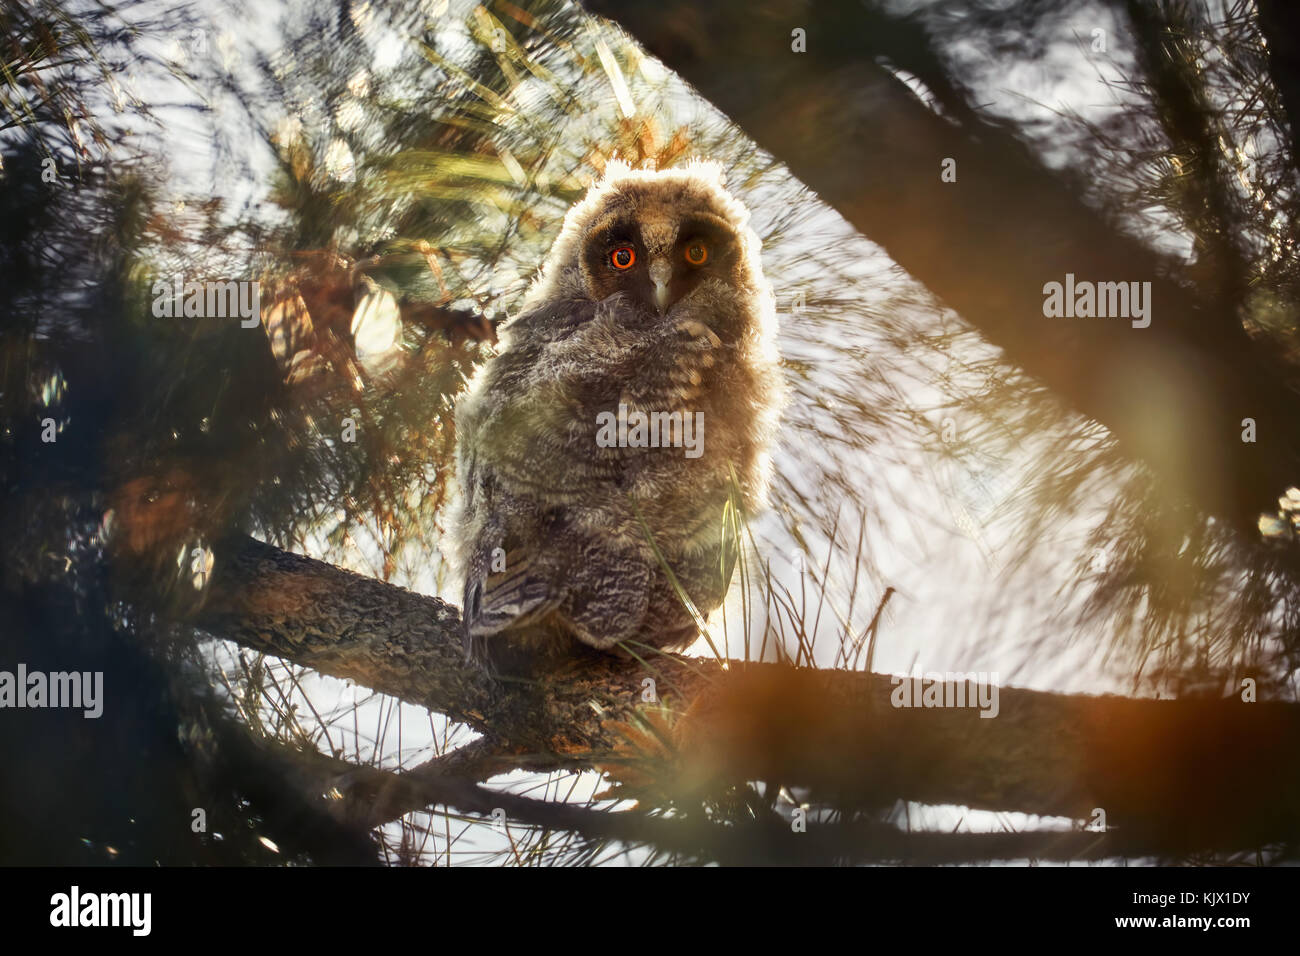 Cute owl chick sitting on the bench in the forest at sunset Stock Photo